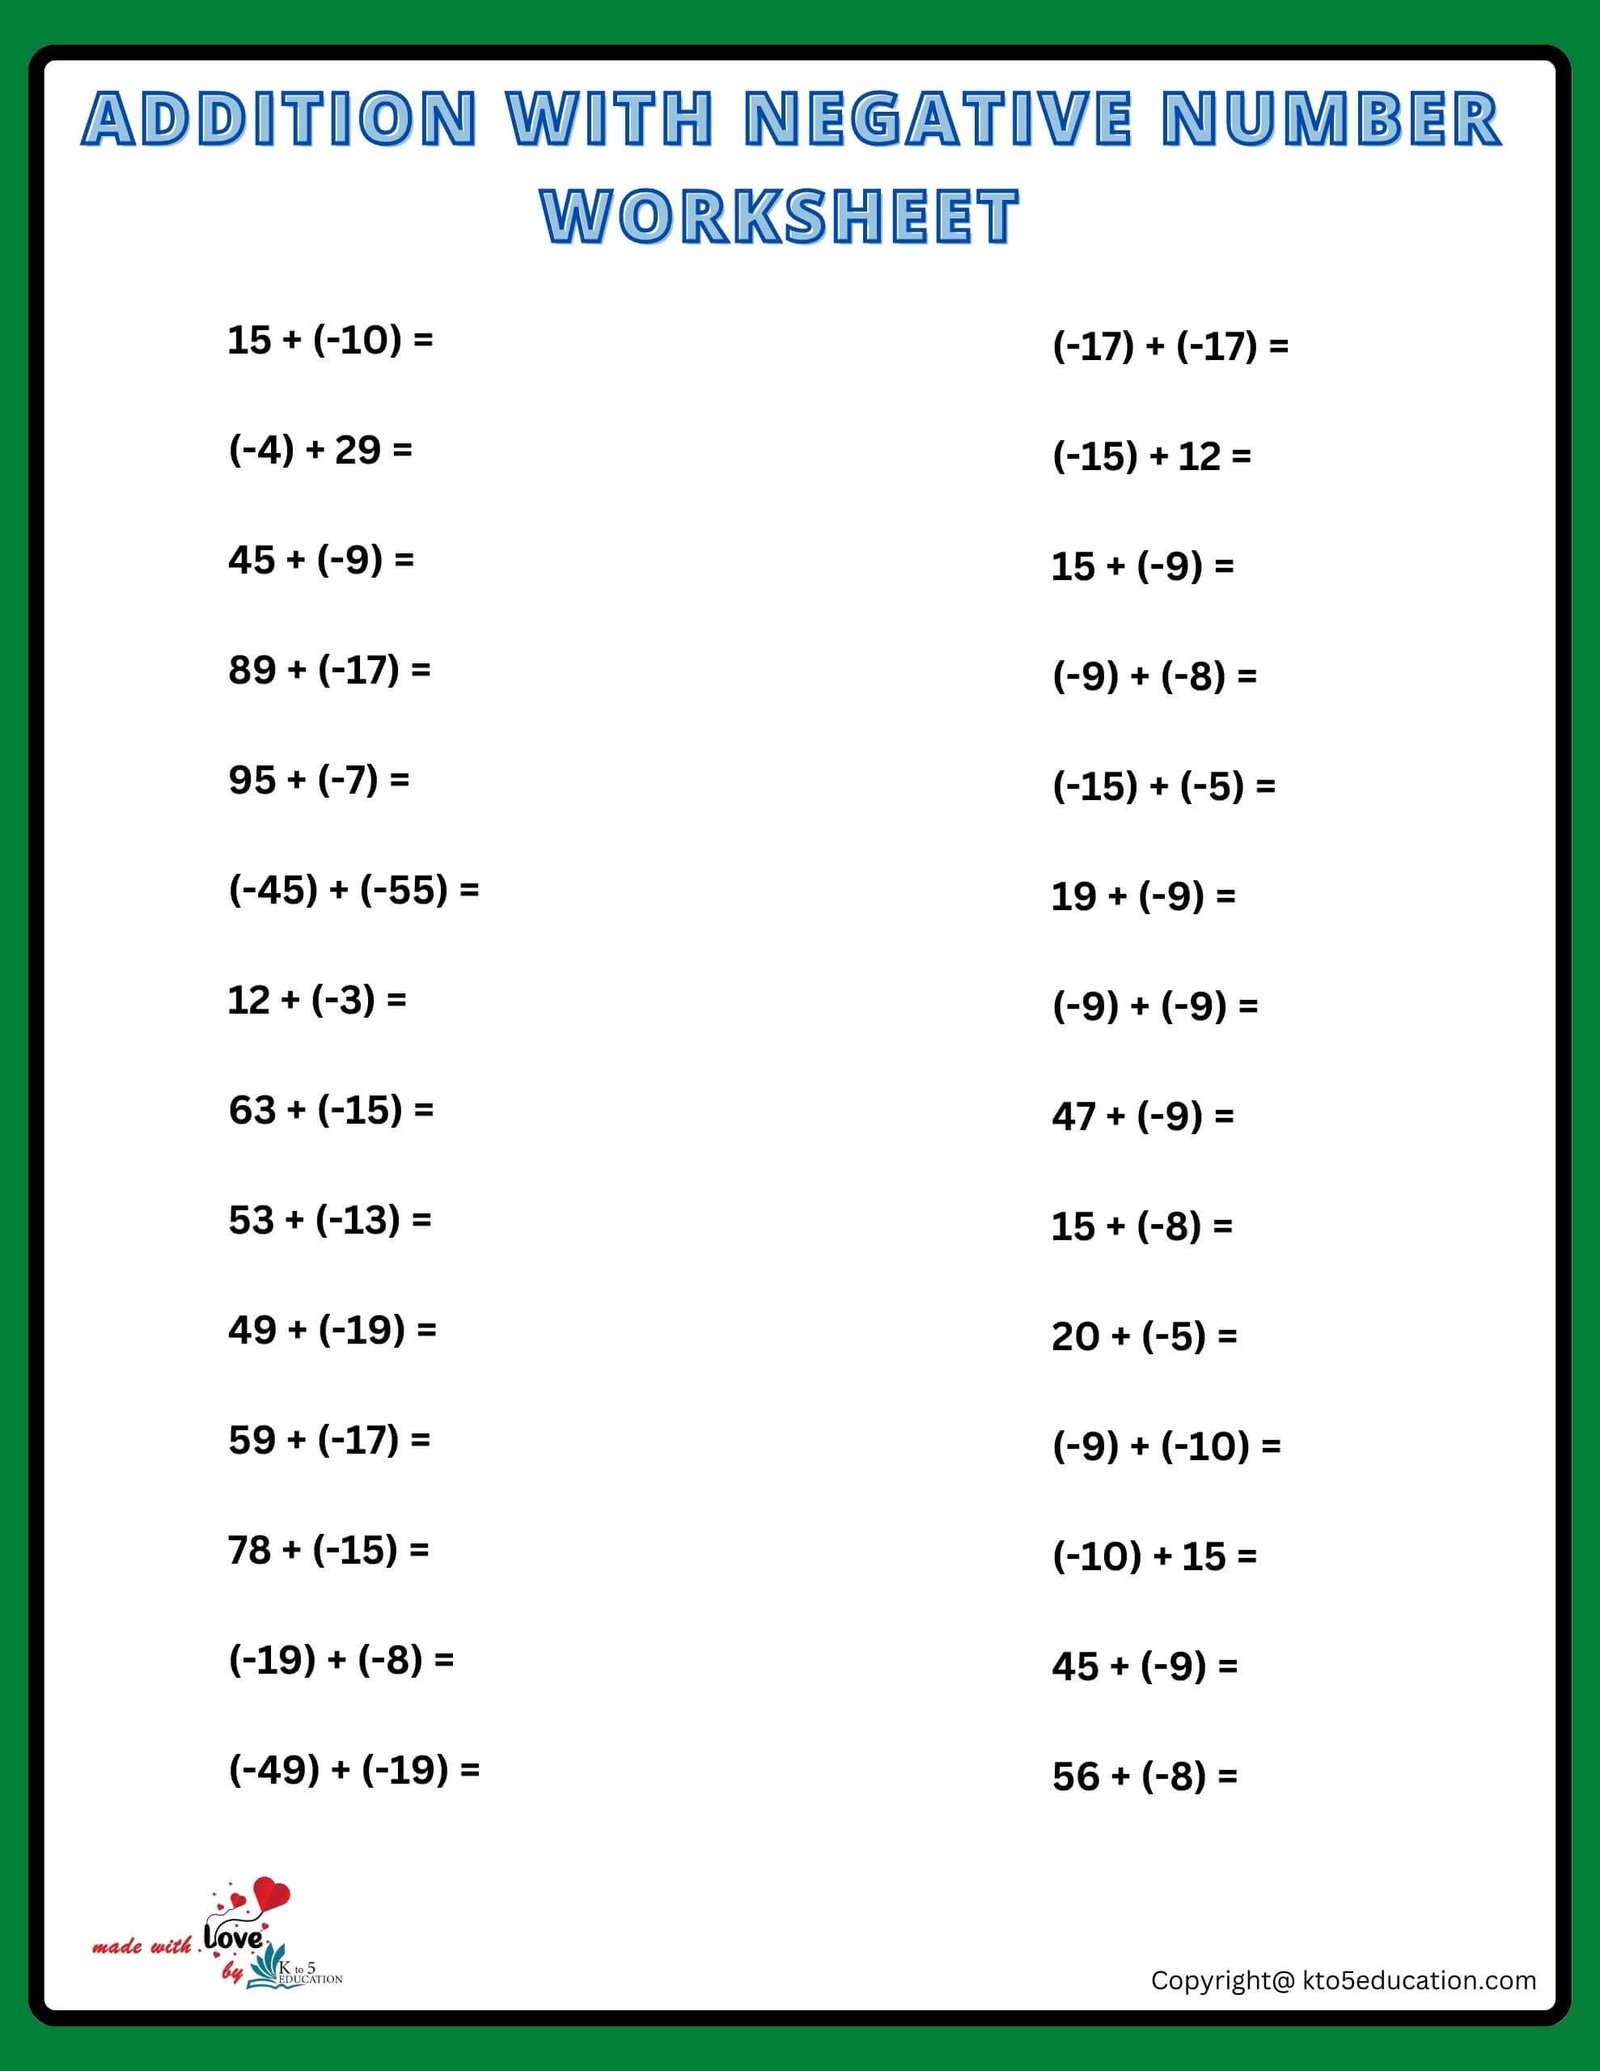 Addition Of Double Digit Numbers Worksheet